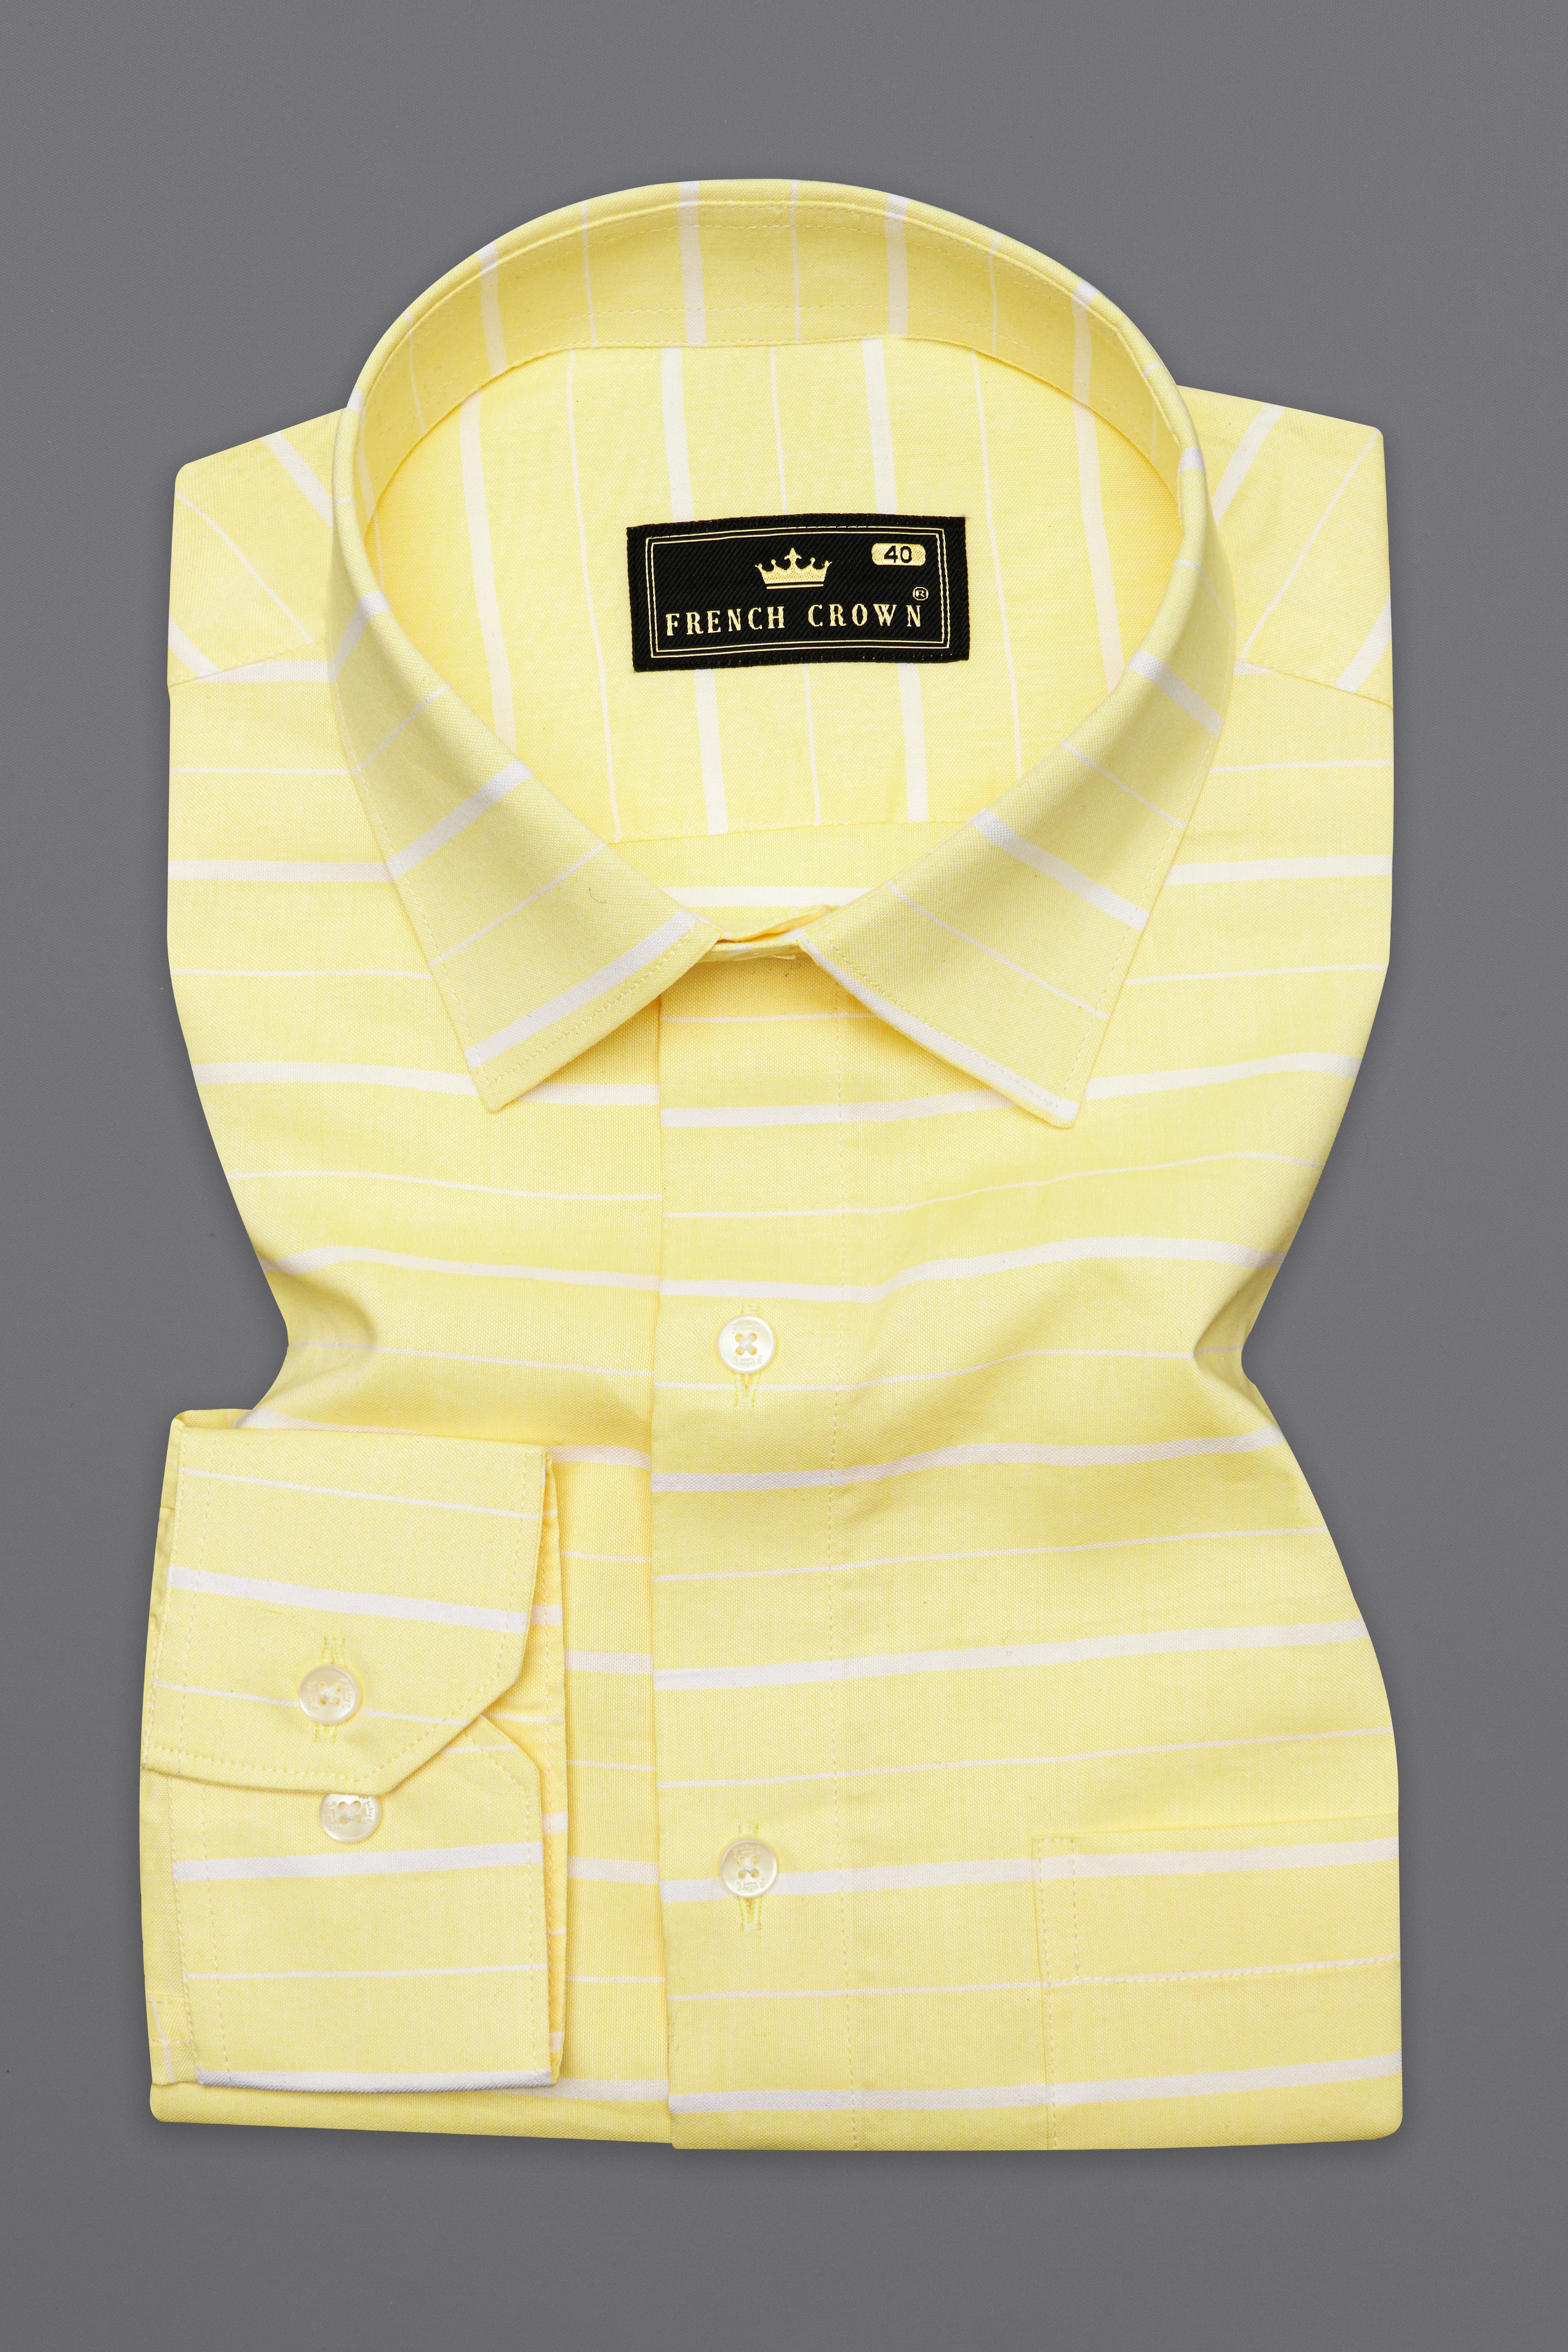 Astra Yellow and White Striped Royal Oxford Shirt 10130-38, 10130-H-38, 10130-39, 10130-H-39, 10130-40, 10130-H-40, 10130-42, 10130-H-42, 10130-44, 10130-H-44, 10130-46, 10130-H-46, 10130-48, 10130-H-48, 10130-50, 10130-H-50, 10130-52, 10130-H-52